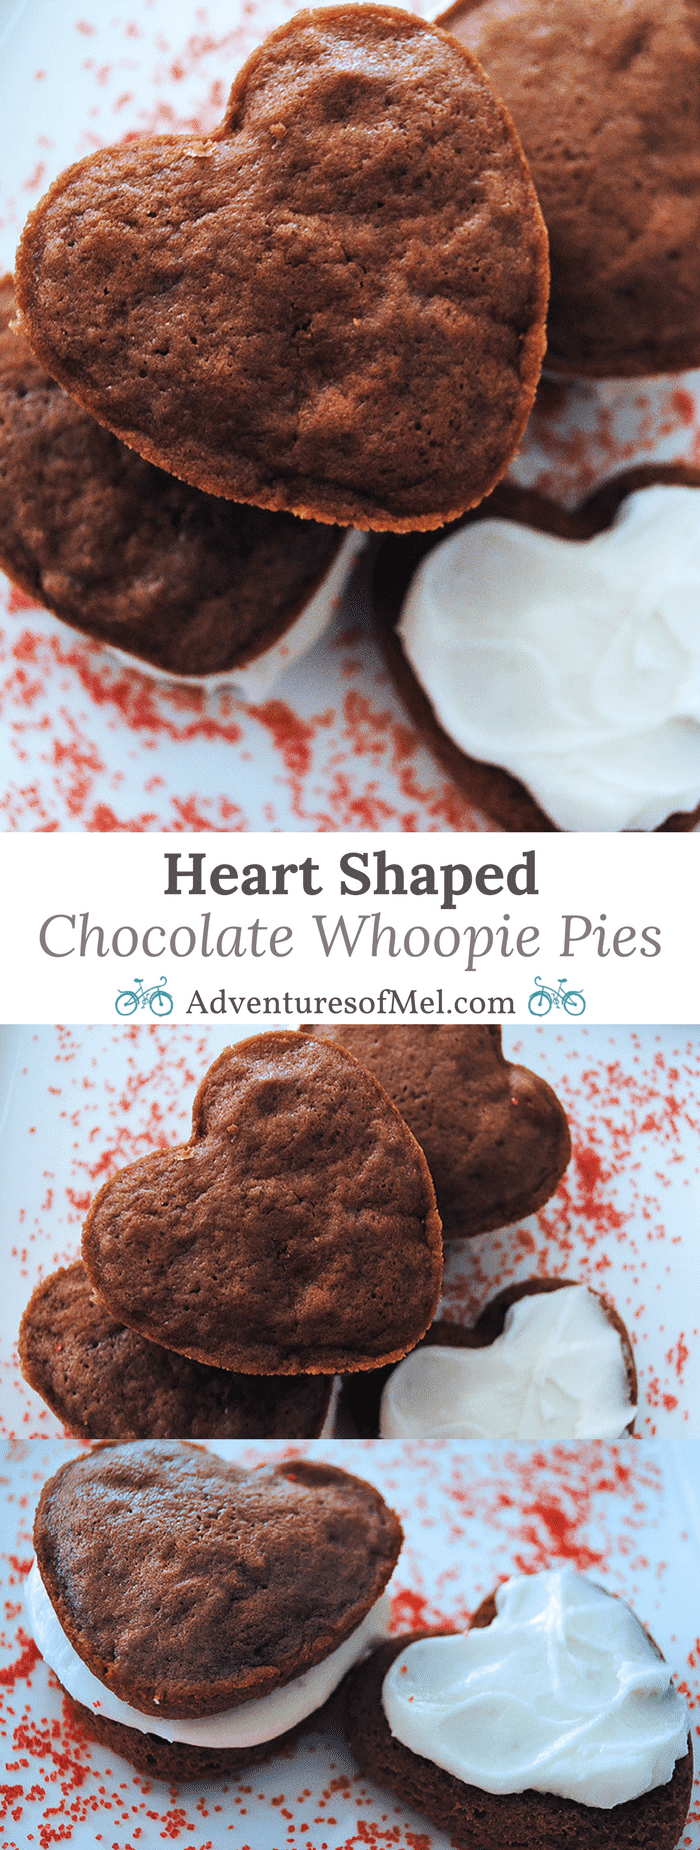 Chocolate sandwich cookies are a favorite family recipe passed down from generation to generation. Whether you call them sandwich cookies or whoopie pies, Heart Shaped Chocolate Whoopie Pies really do make a yummy Valentine's Day treat.